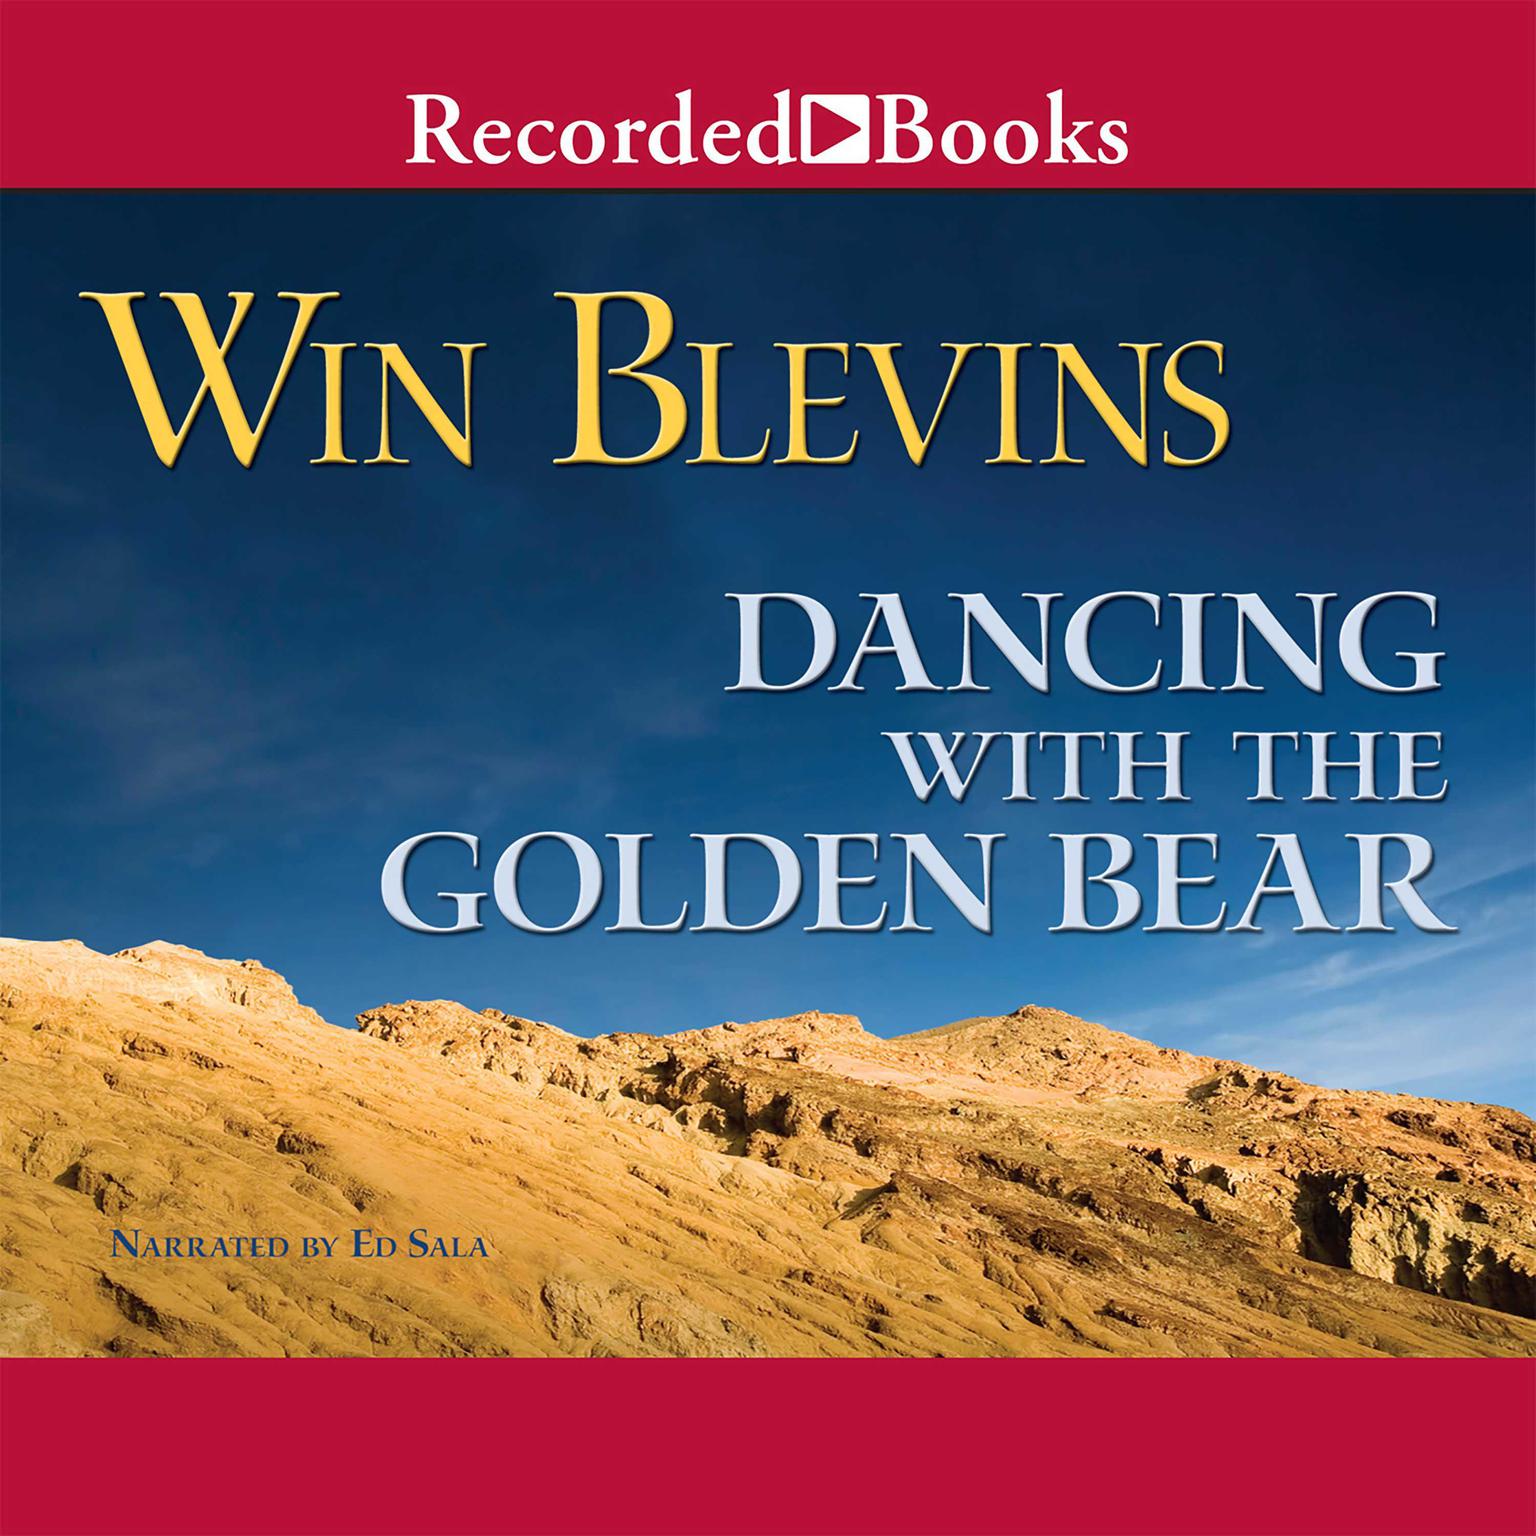 Dancing with the Golden Bear Audiobook, by Win Blevins